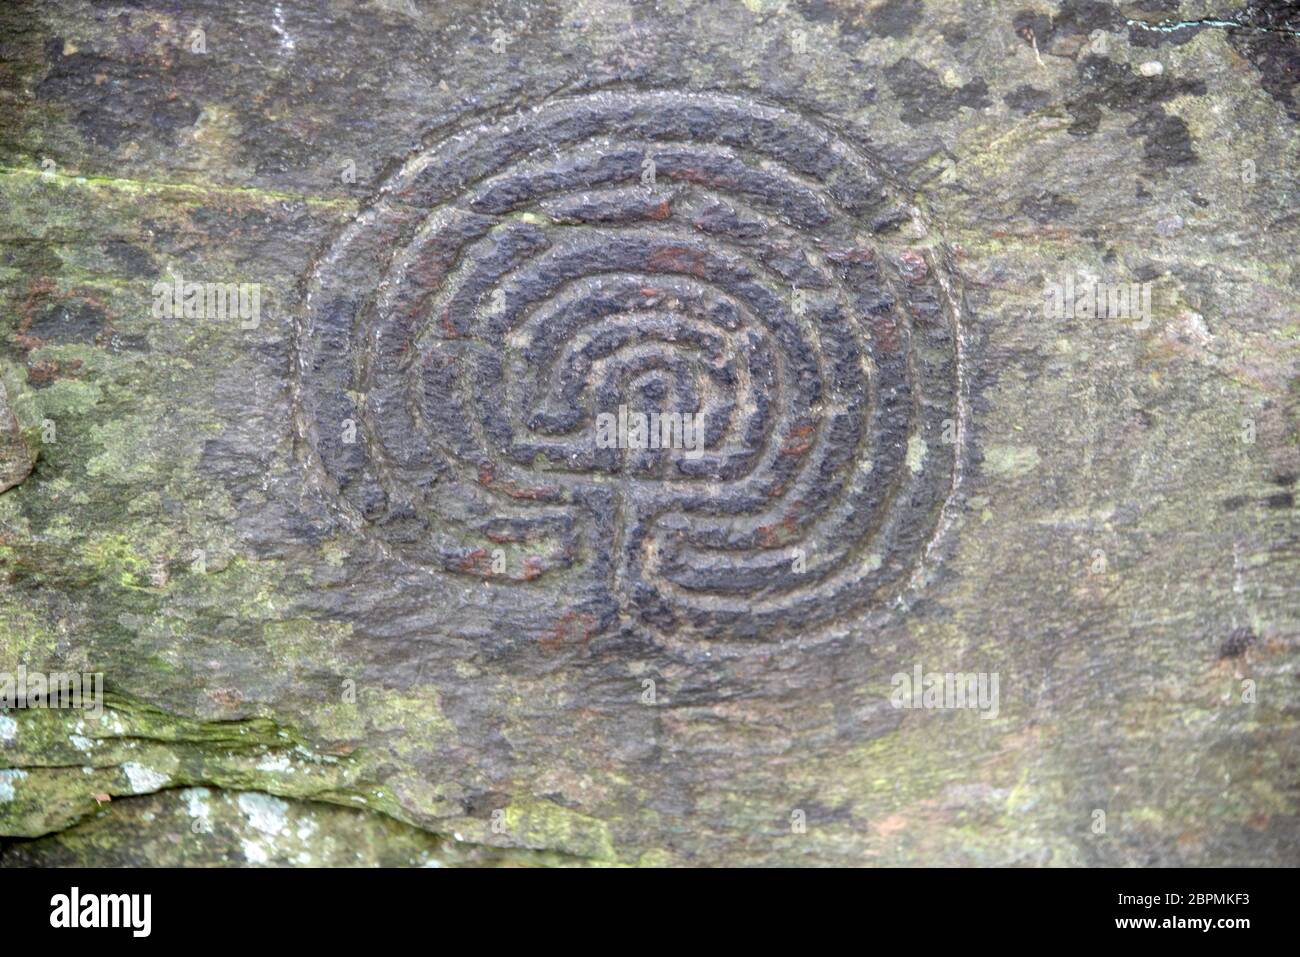 Labyrinthine stone carvings in the Rock valley near Tintagel in cornwall. The carvings, discovered in 1948, are belived to be from the Bronze Age. Stock Photo